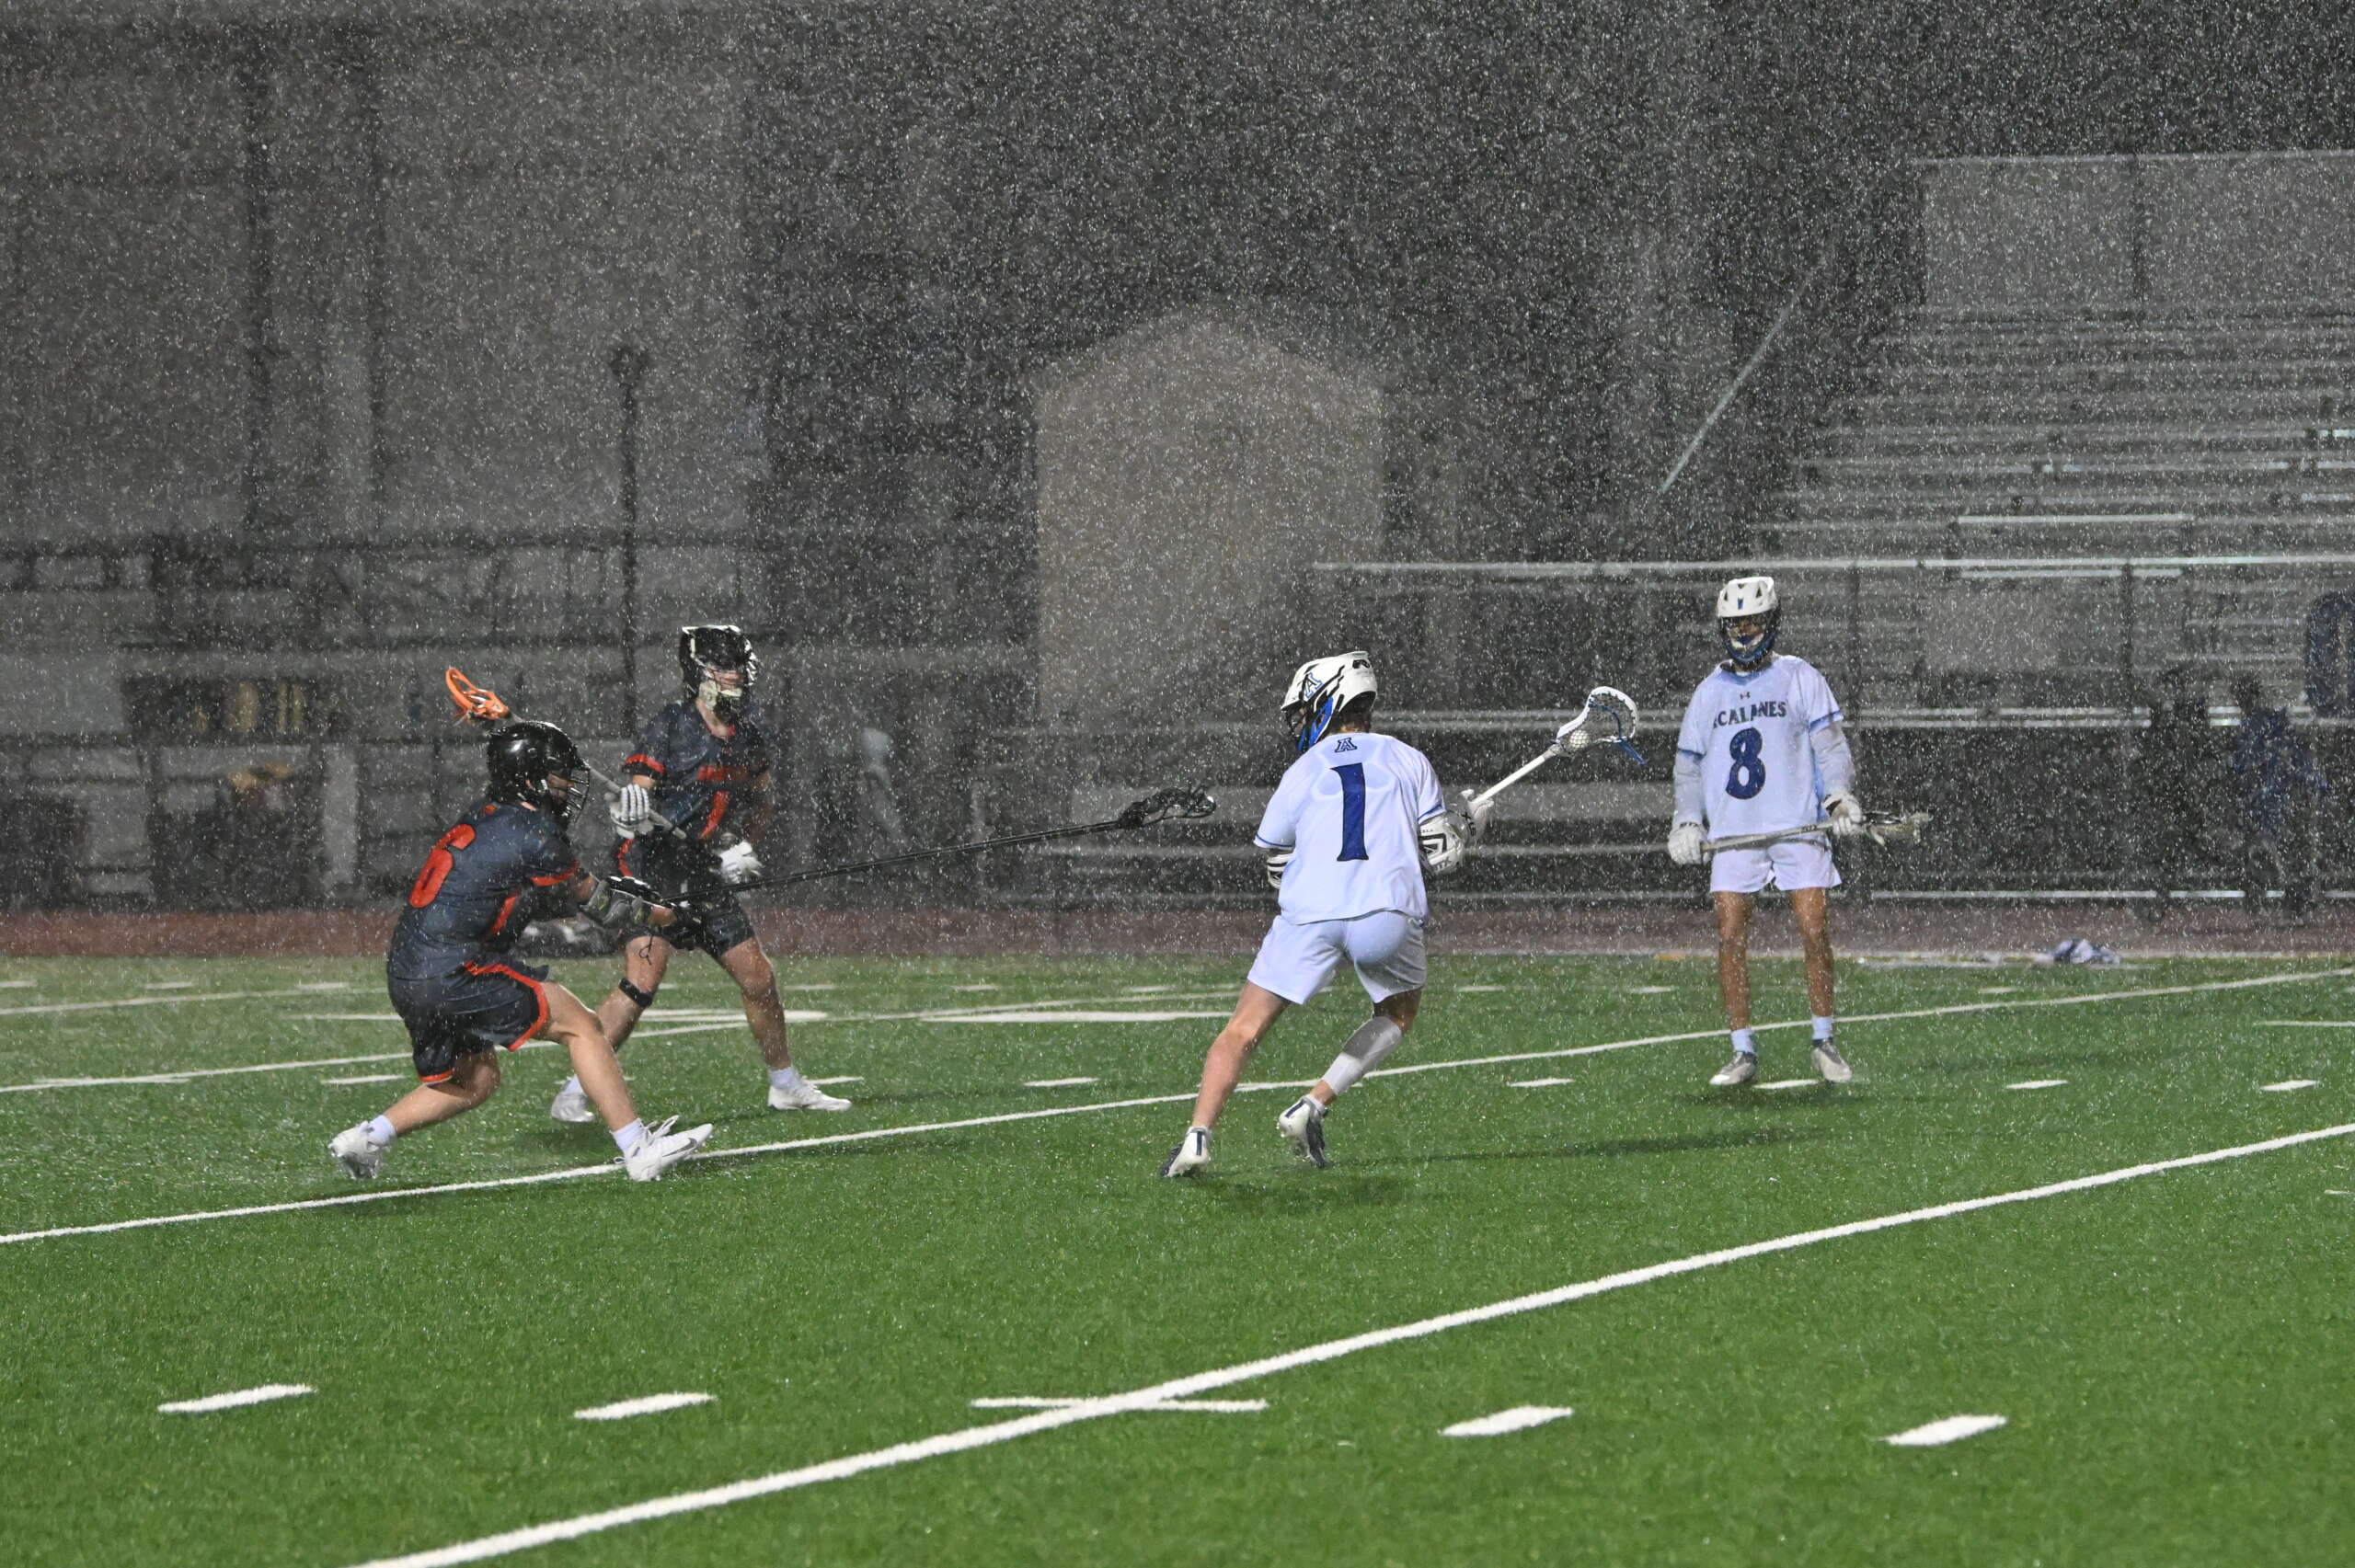 Varsity Boys Lacrosse Team Fall to Cal High 10-8  in a Friday Night Deluge